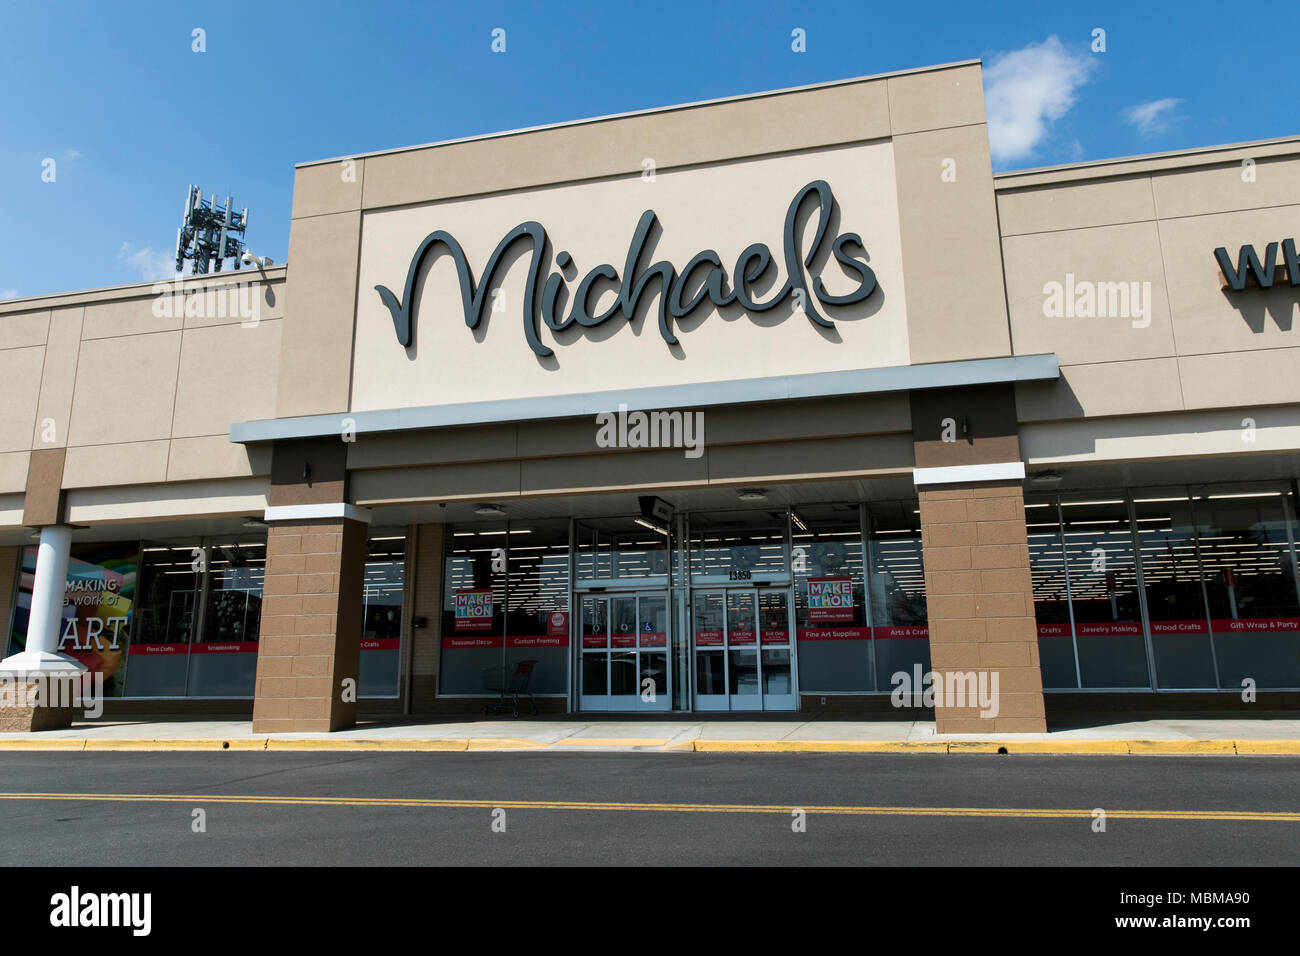 https://c8.alamy.com/comp/MBMA90/a-logo-sign-outside-of-a-michaels-retail-store-location-in-silver-spring-maryland-on-april-10-2018-MBMA90.jpg